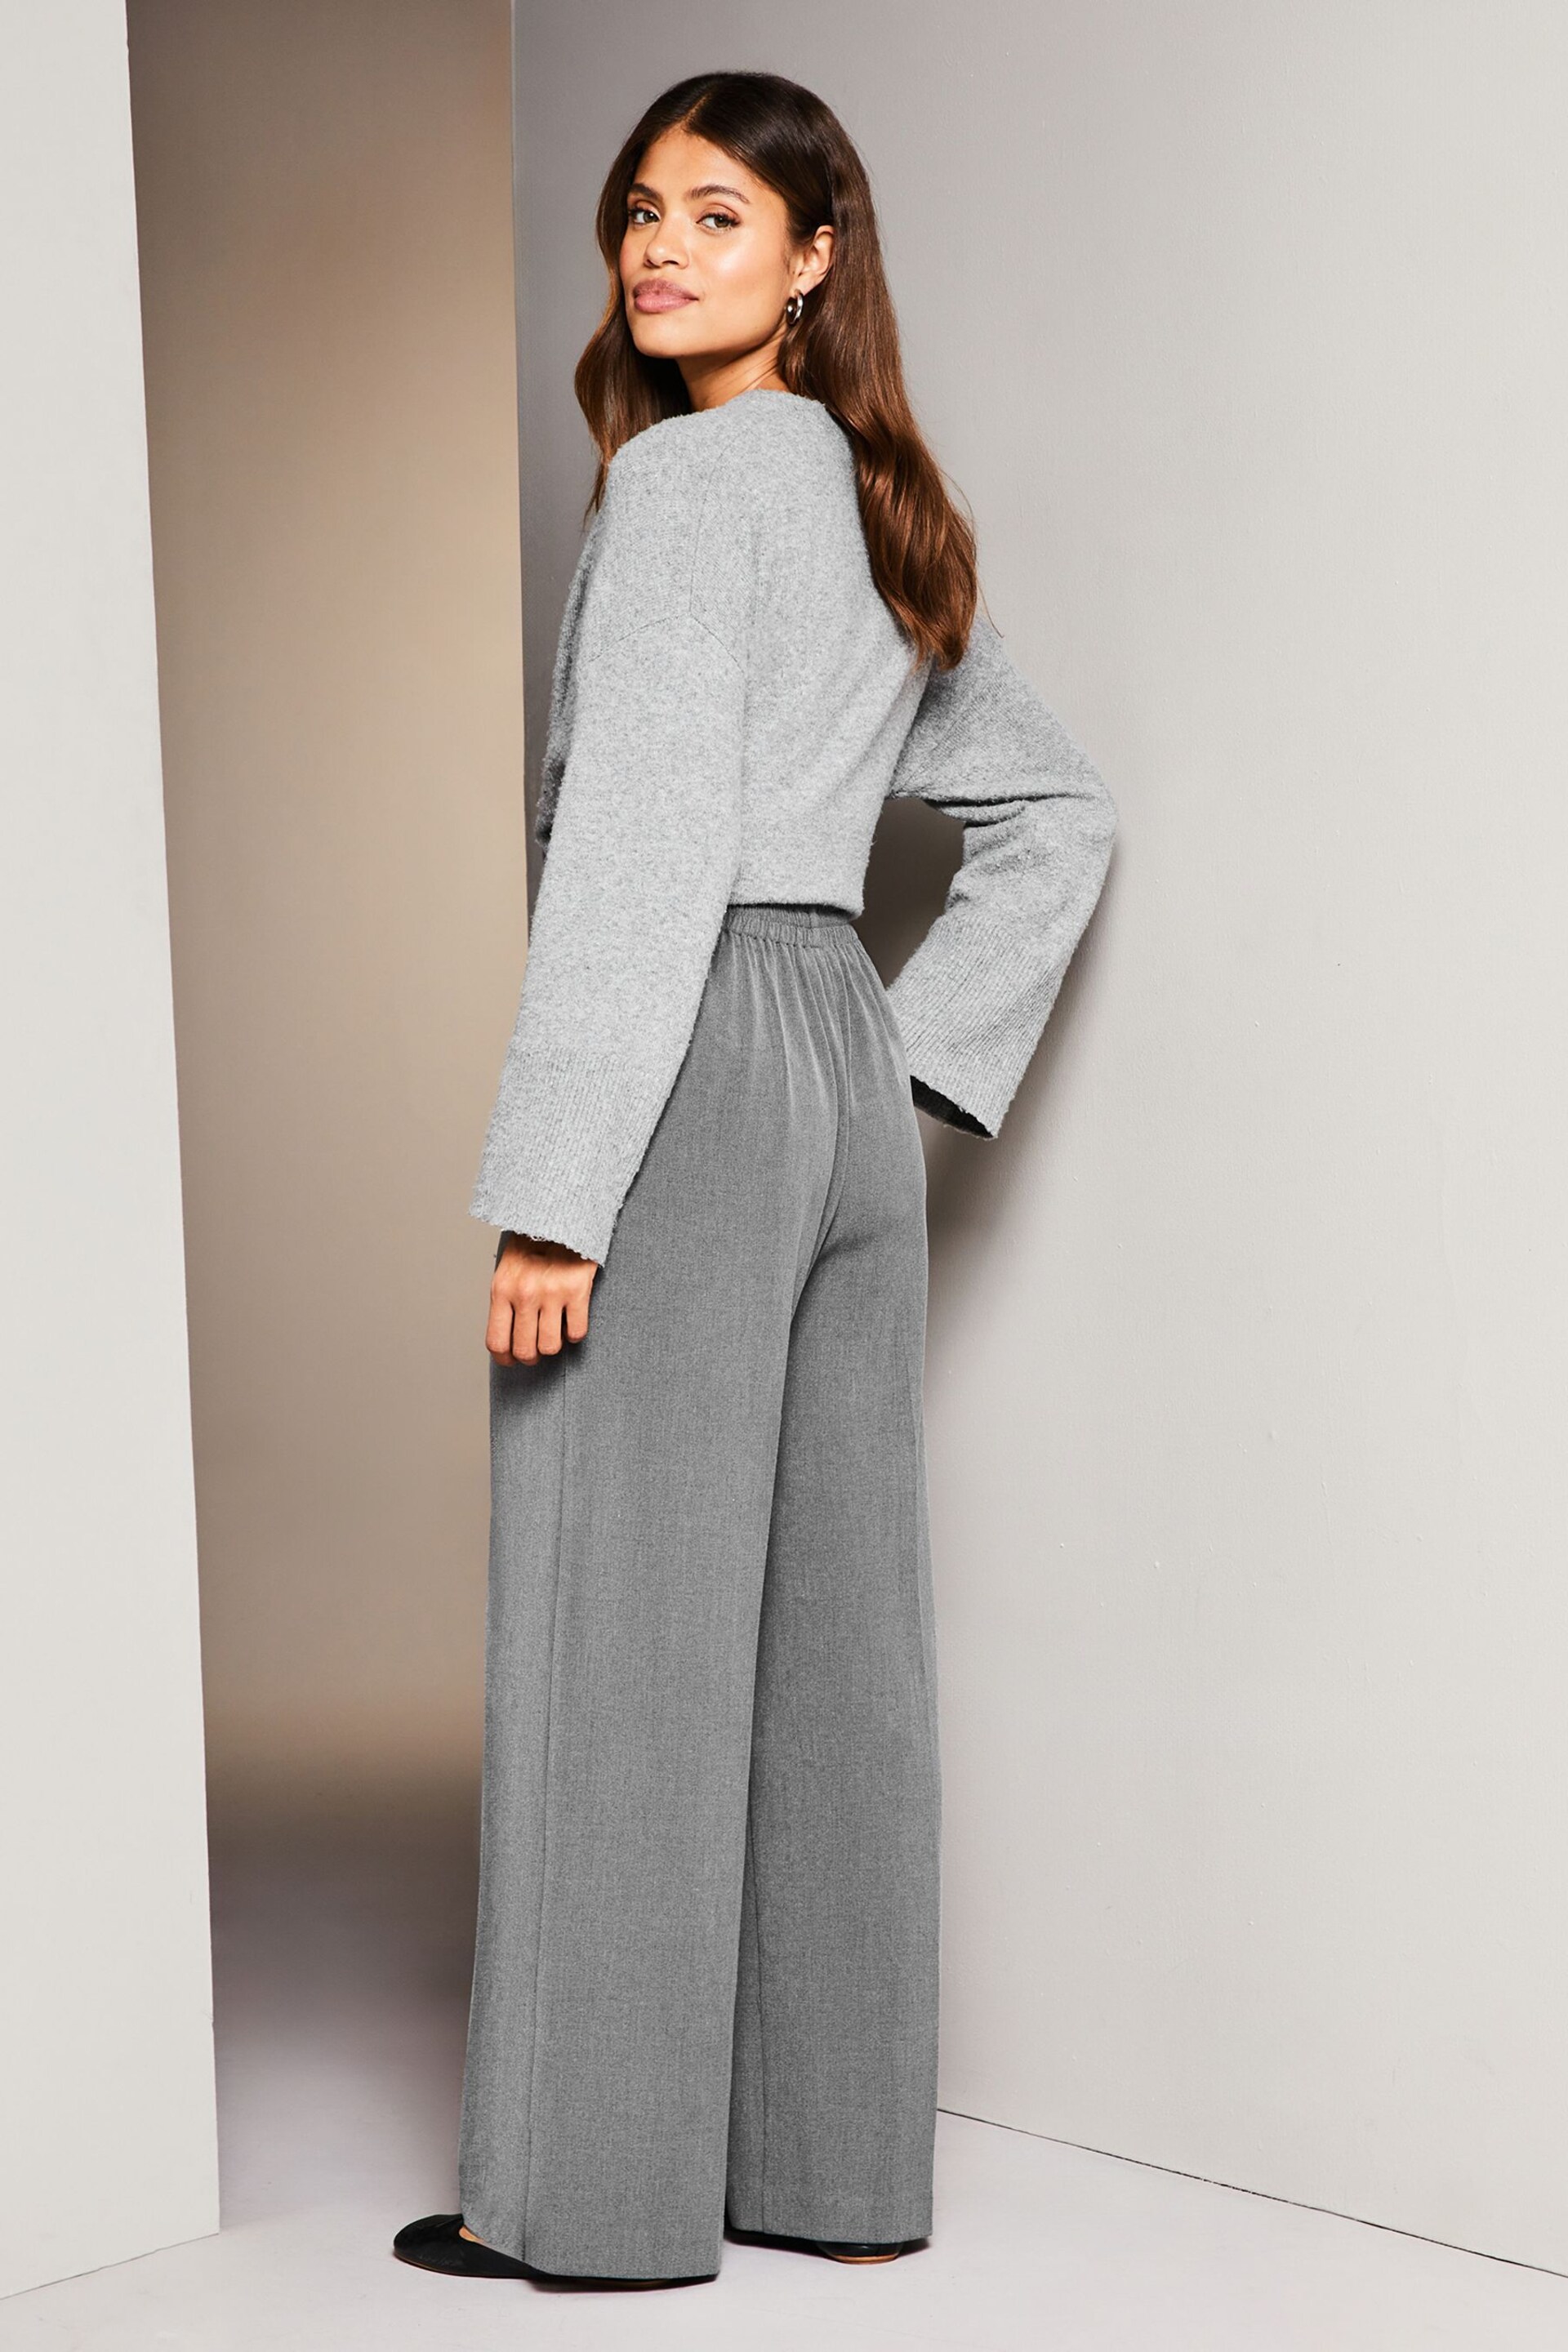 Lipsy Grey Wide Leg Tailored Trousers - Image 2 of 4